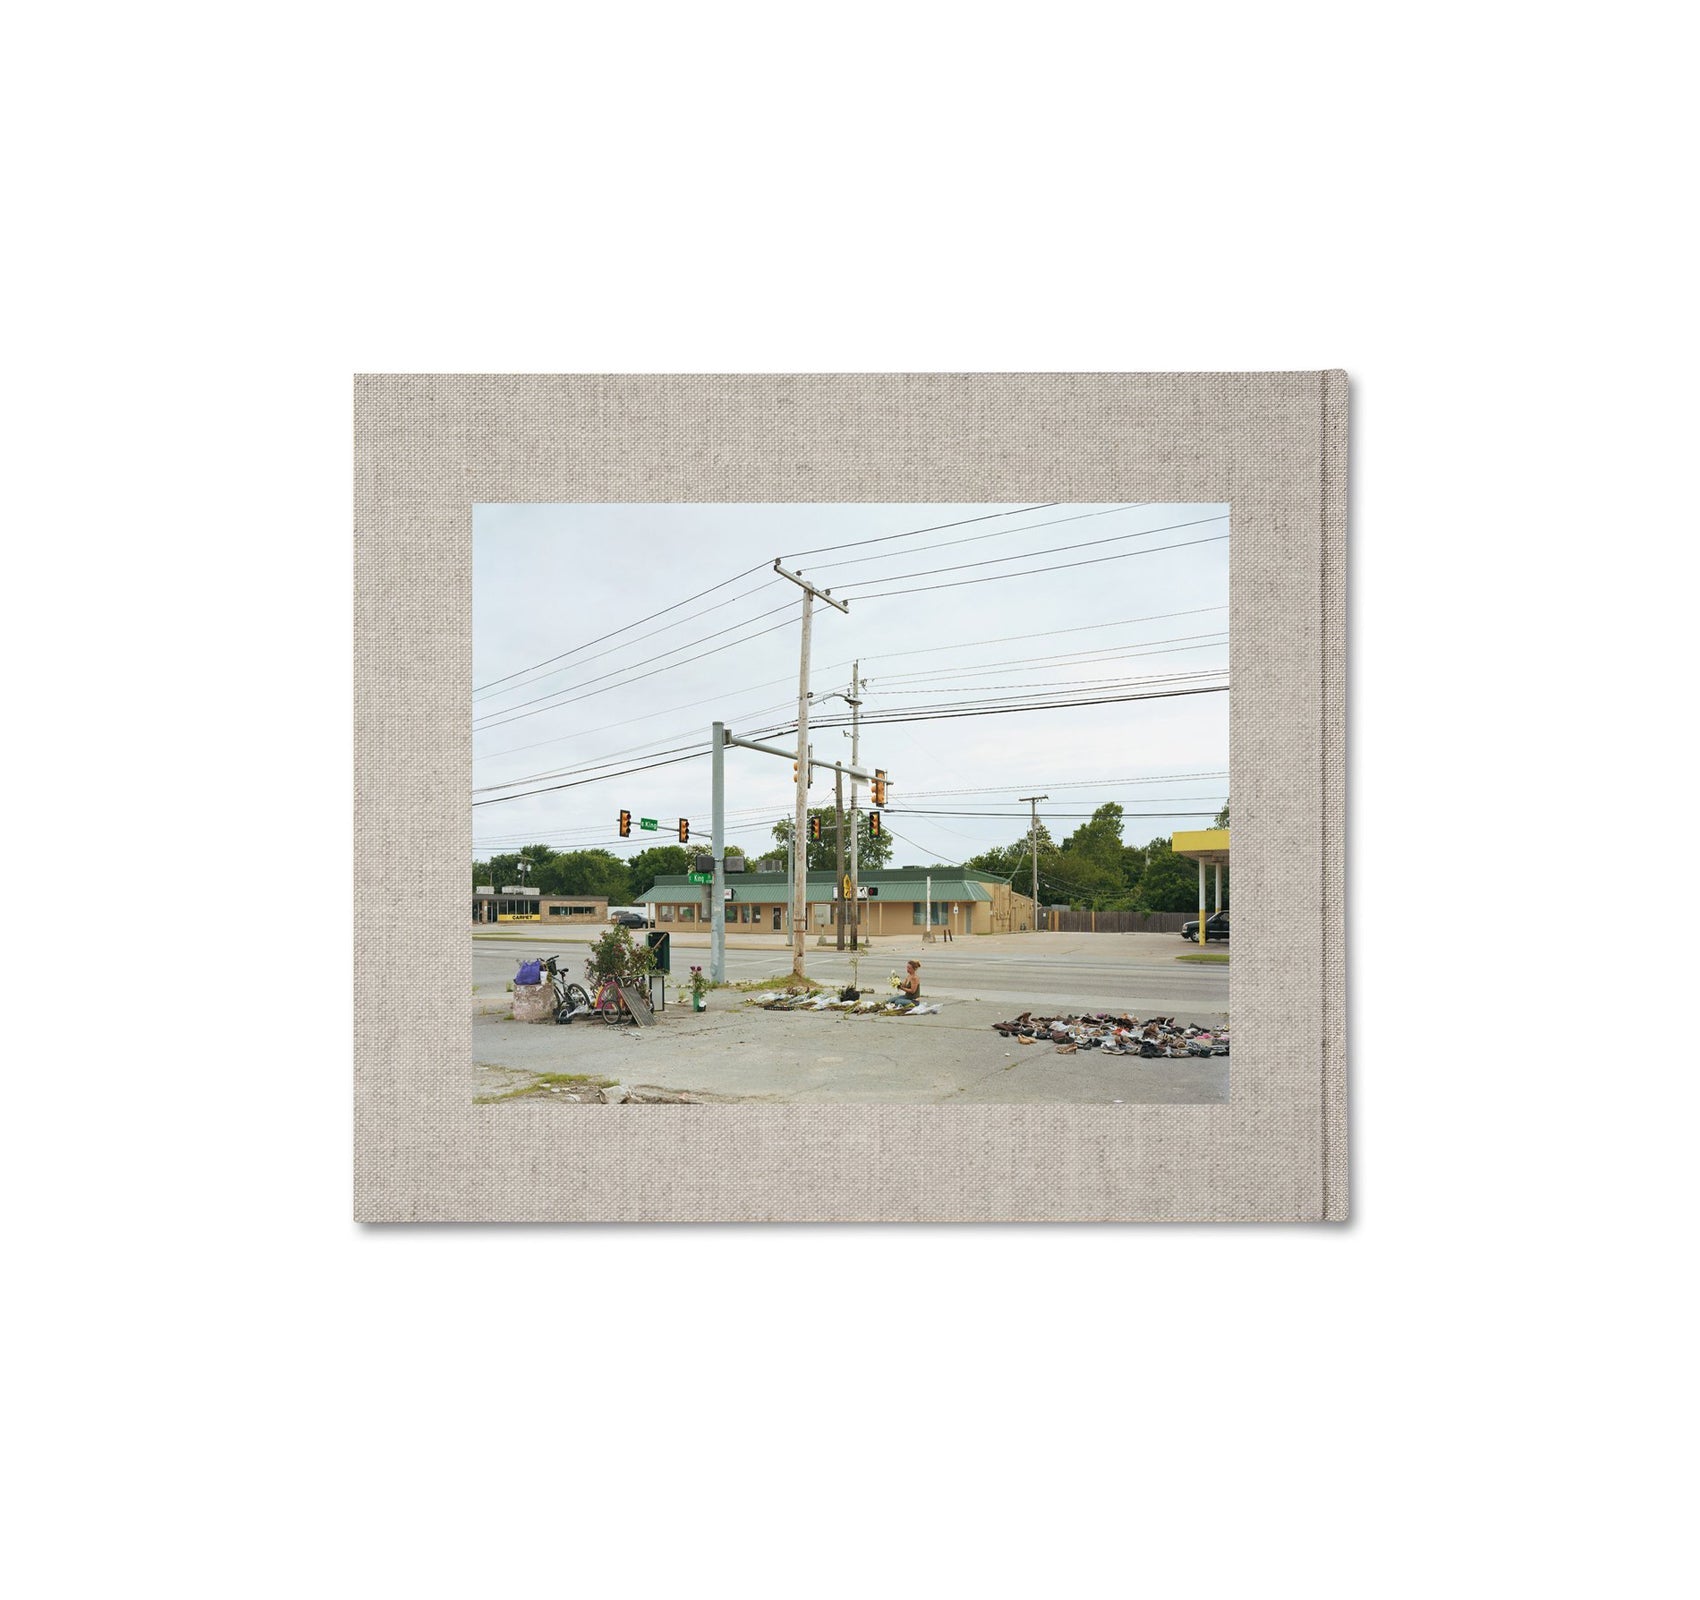 A POUND OF PICTURES by Alec Soth